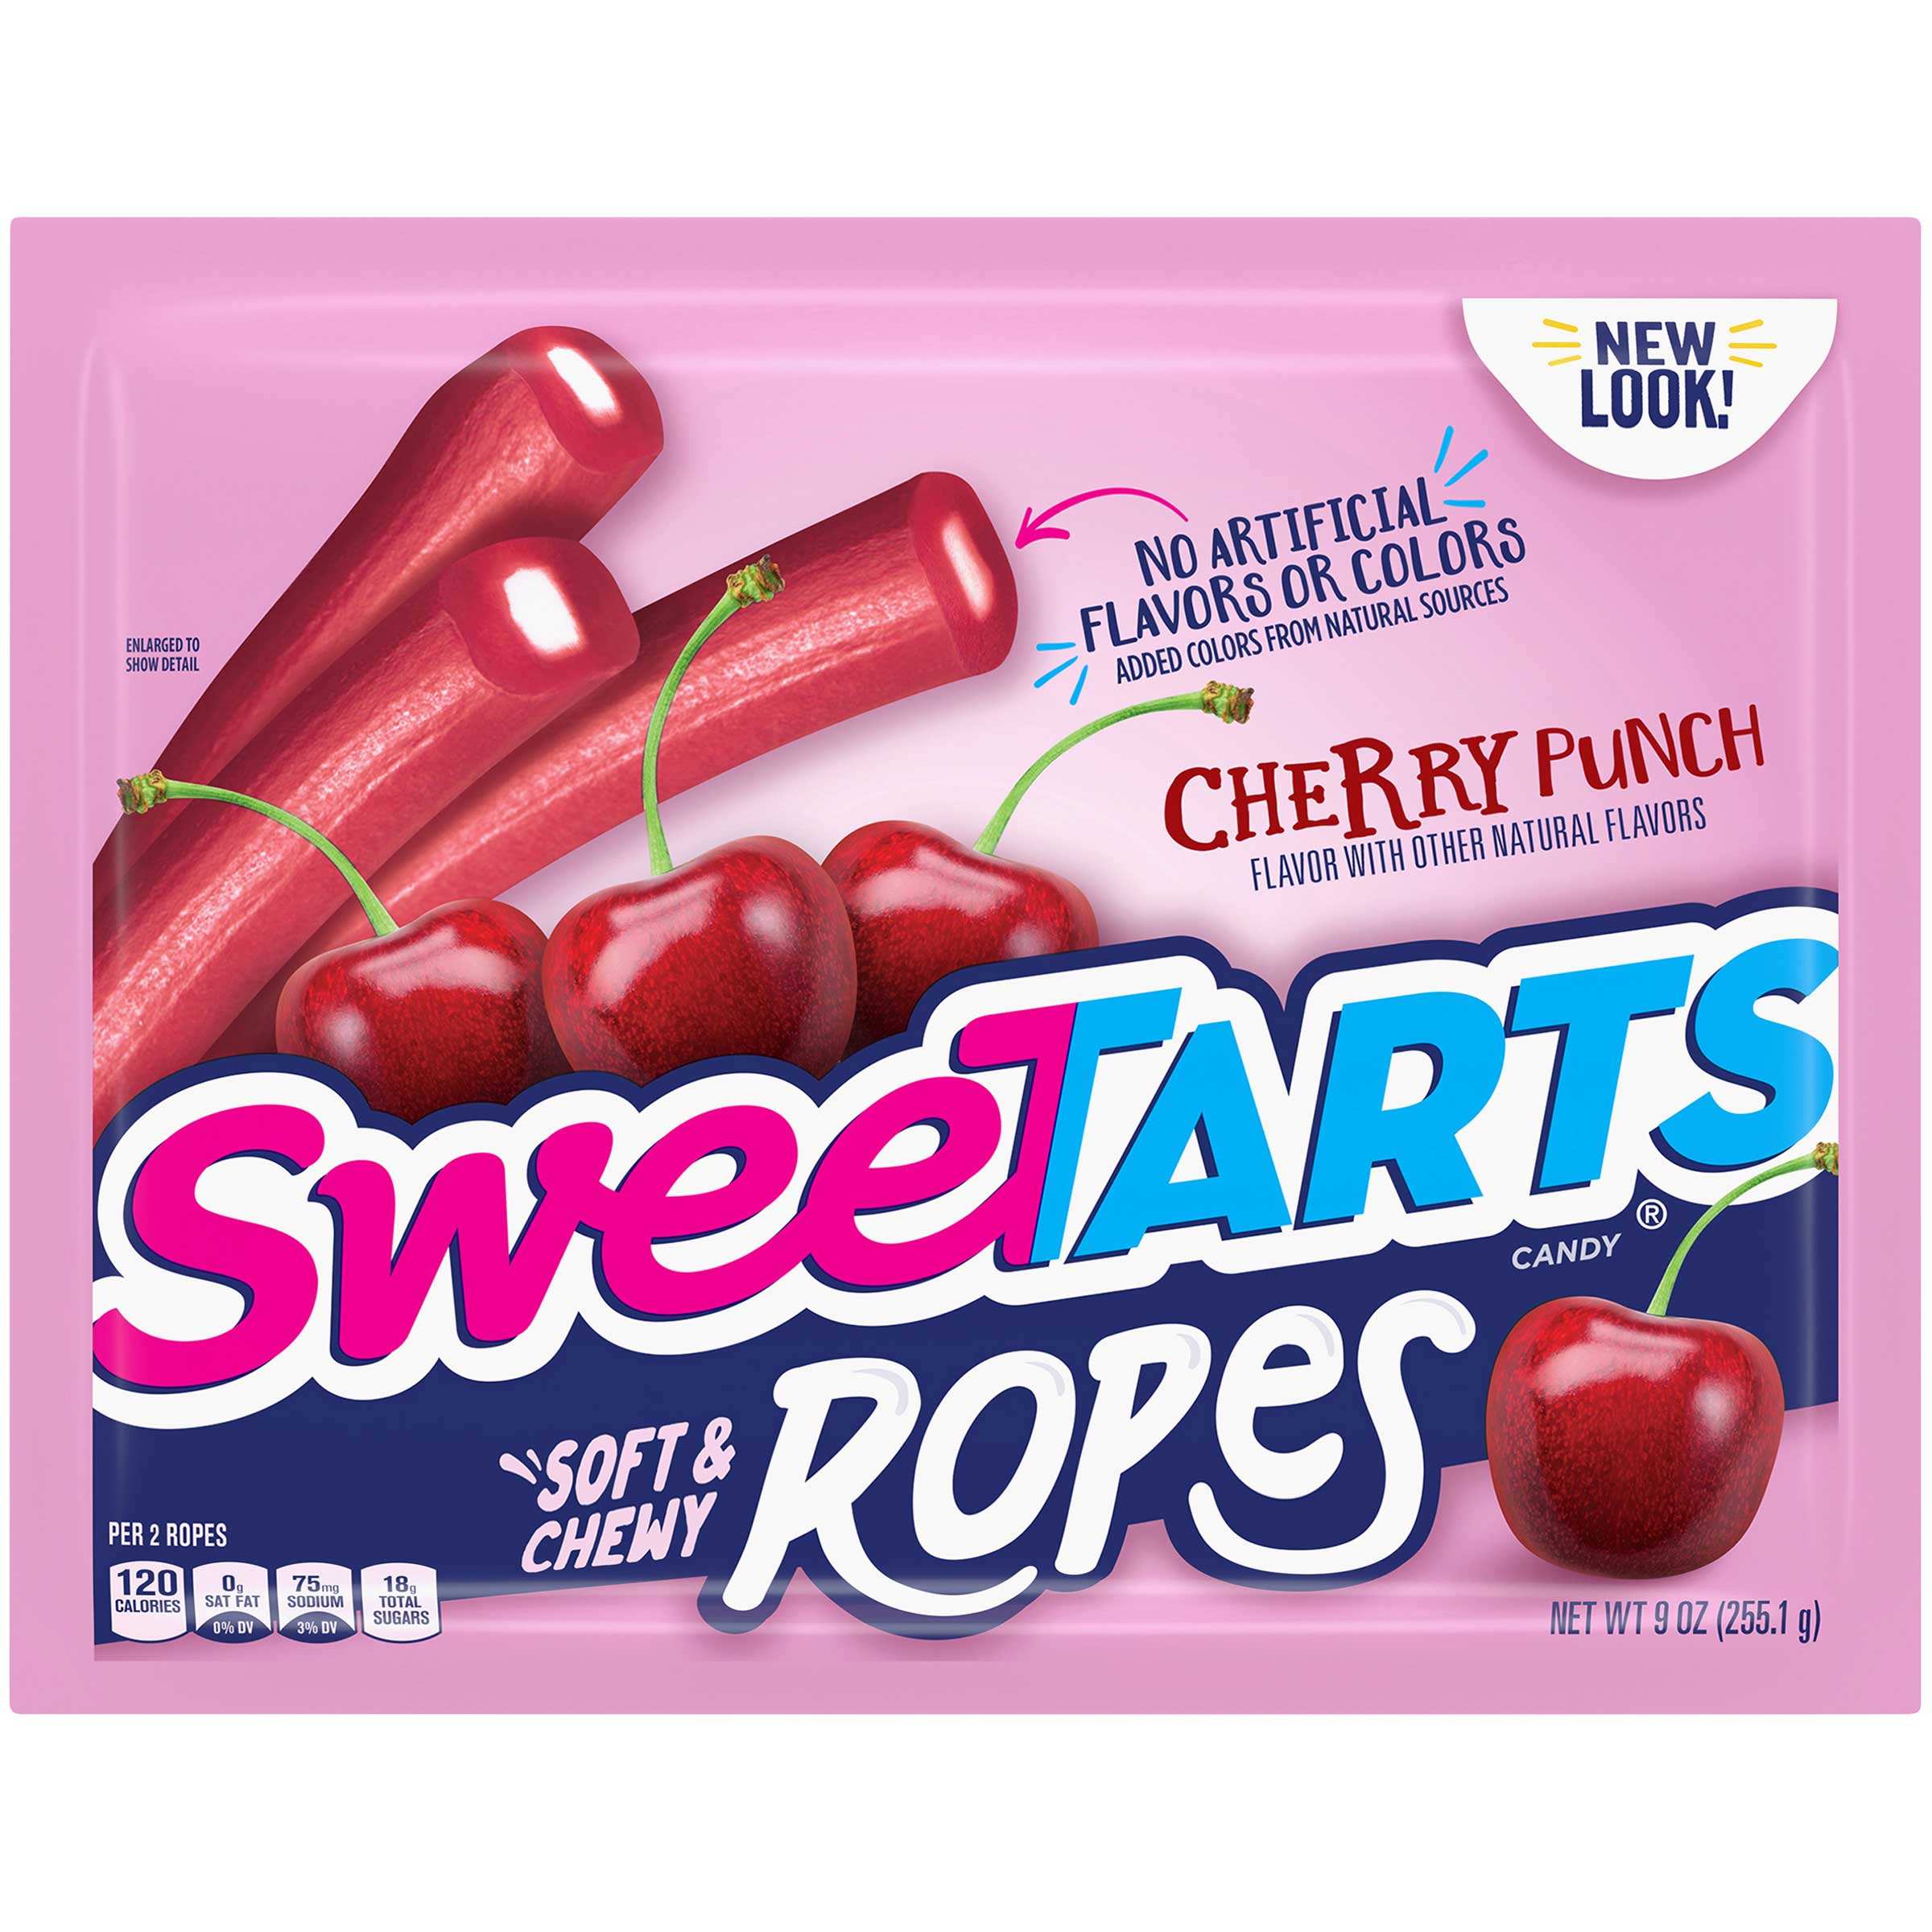 Sweetart Cherry Punch Rope Candy - Laydown Bag, 9 Ounce, 12 per Case